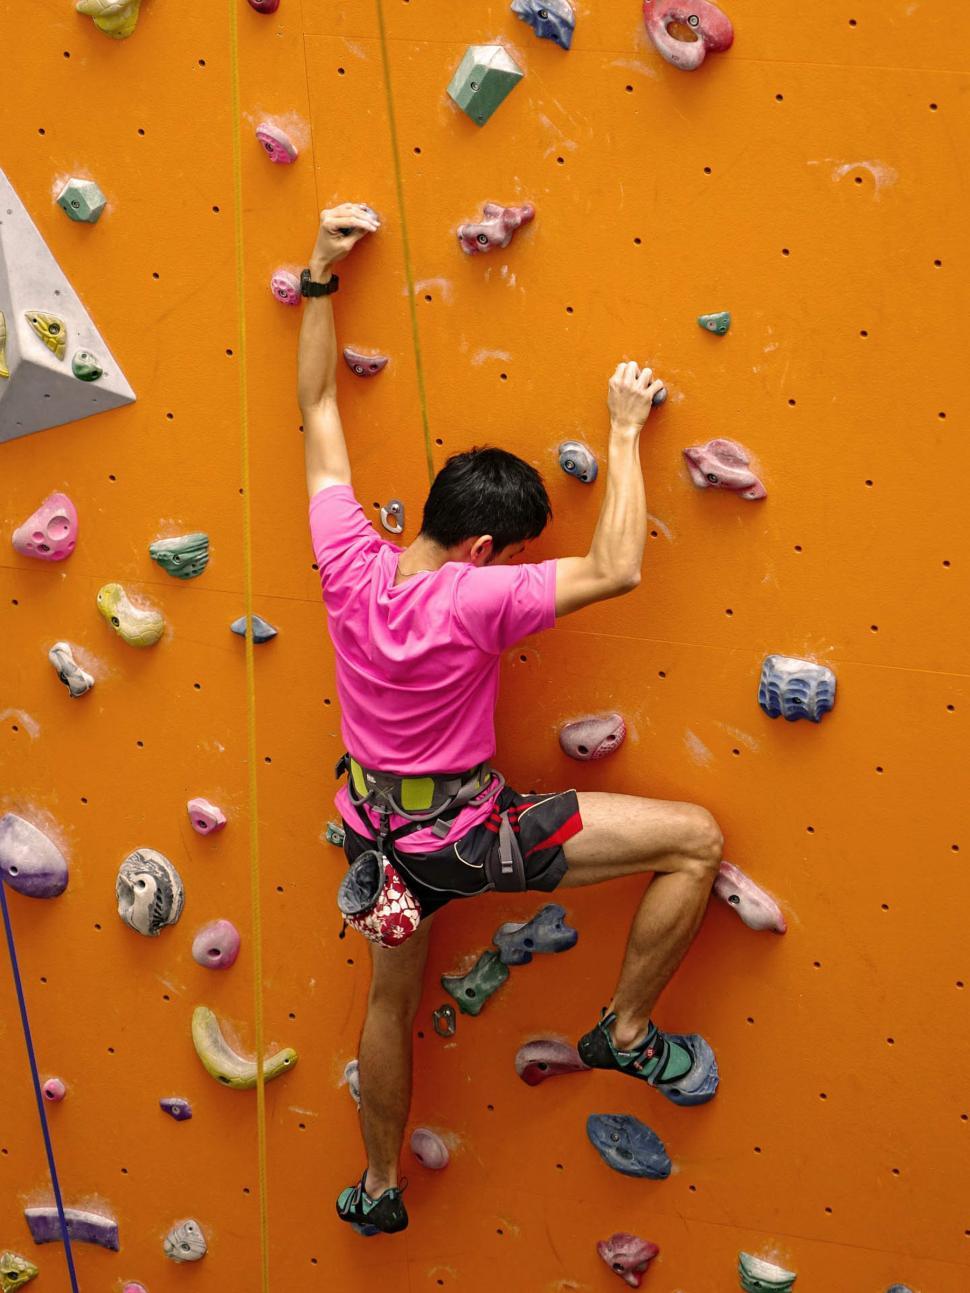 Free Image of Man Climbing Rock Wall With Raised Hands 